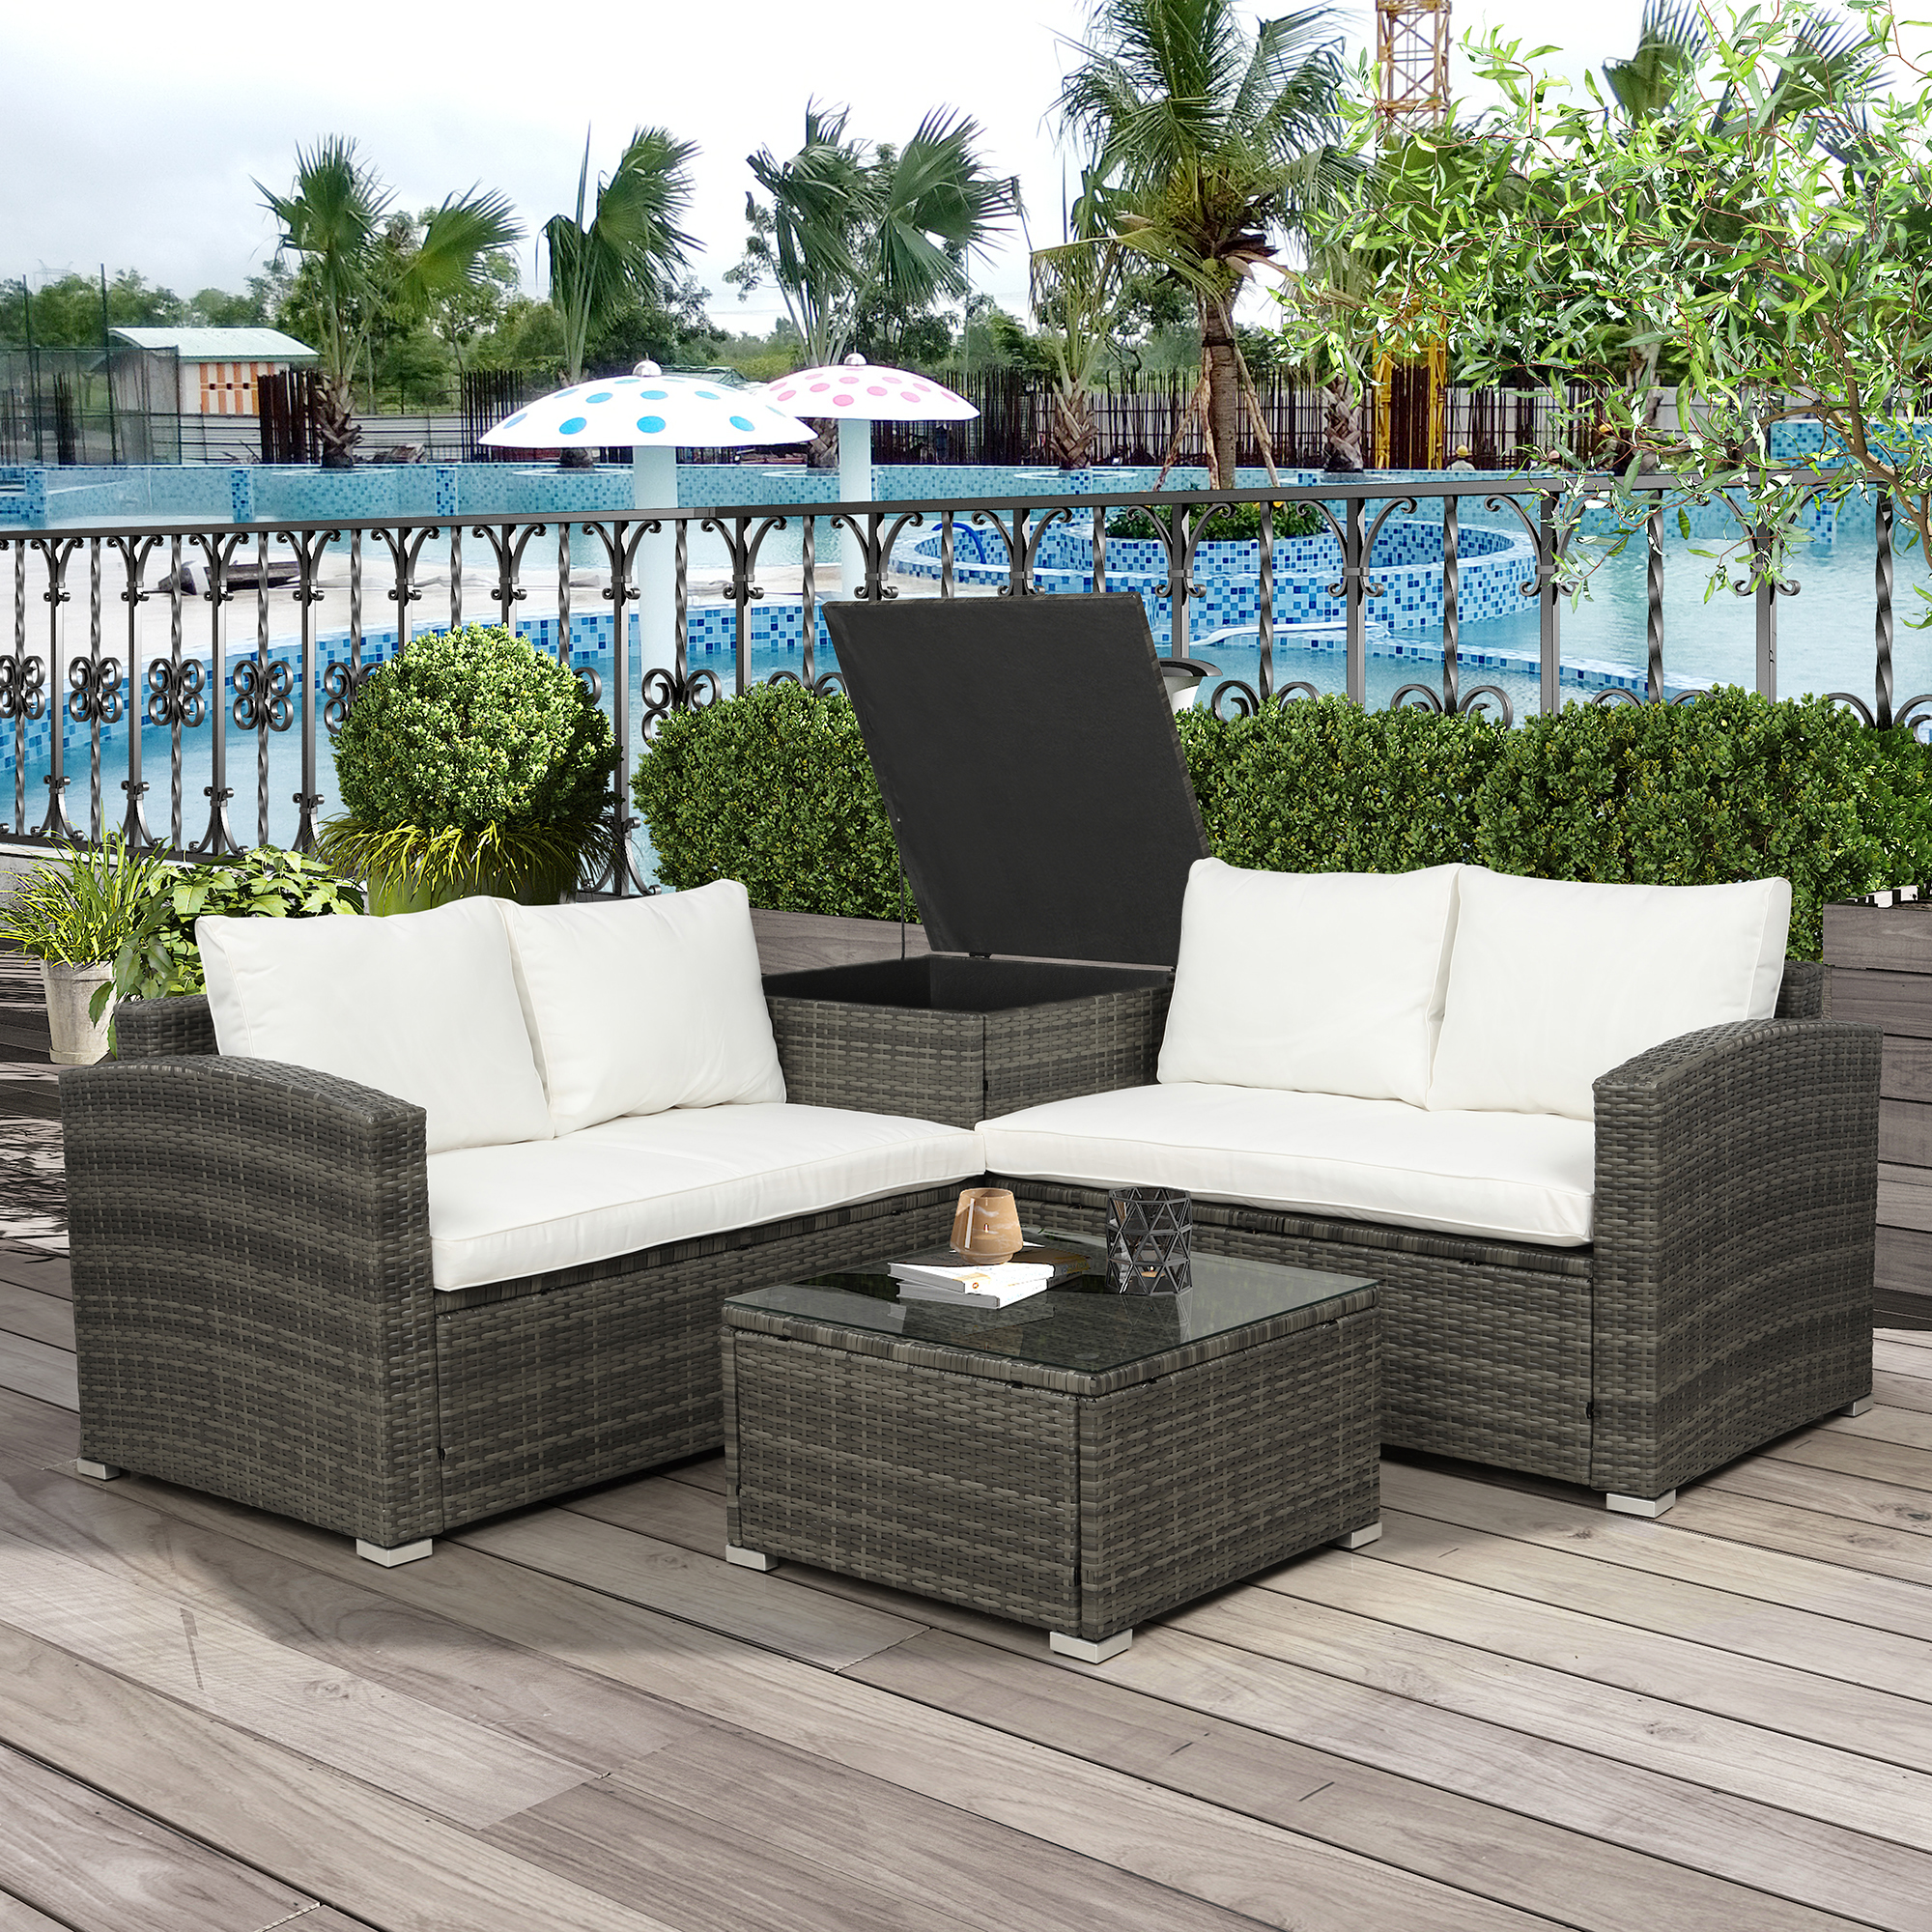 Outdoor Patio Deck Table and Chairs Sets, 4-Piece Wicker Sofa Patio Conversation Furniture Set w/ L-Seats Sofa, R-Seats Sofa, Cushion box, Tempered Glass Dining Table, Padded Cushions, Beige, S13115 - image 3 of 7